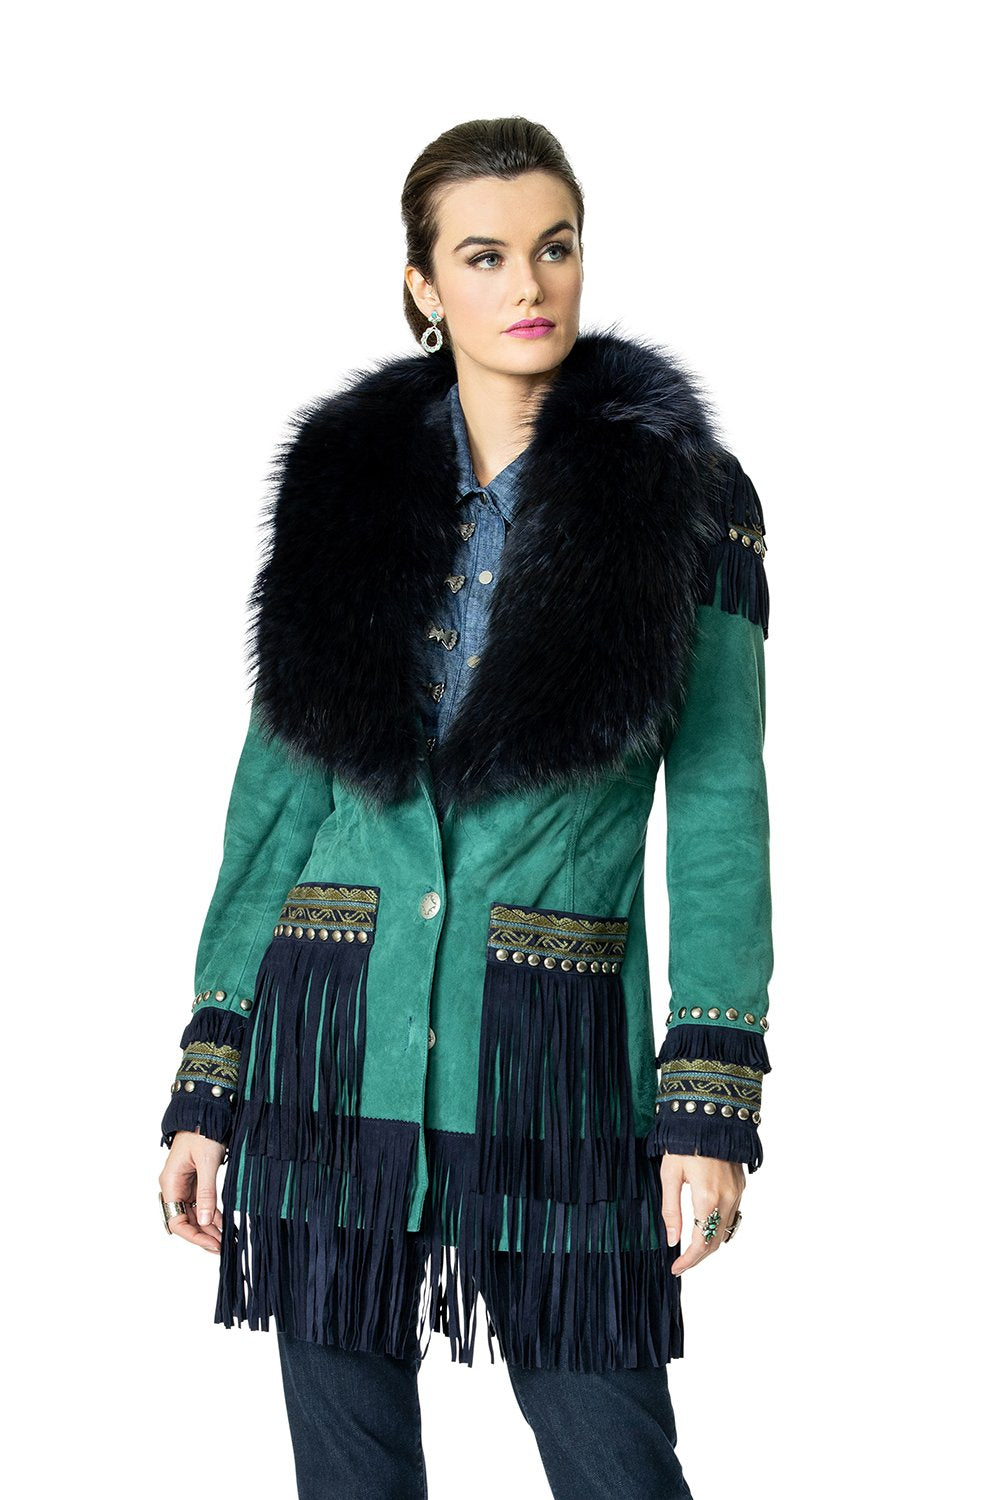 DDR Sandia Pass Teal Jacket 6Whiskey six whisky knee-length leather fringe coat Taos Holiday collection C2756